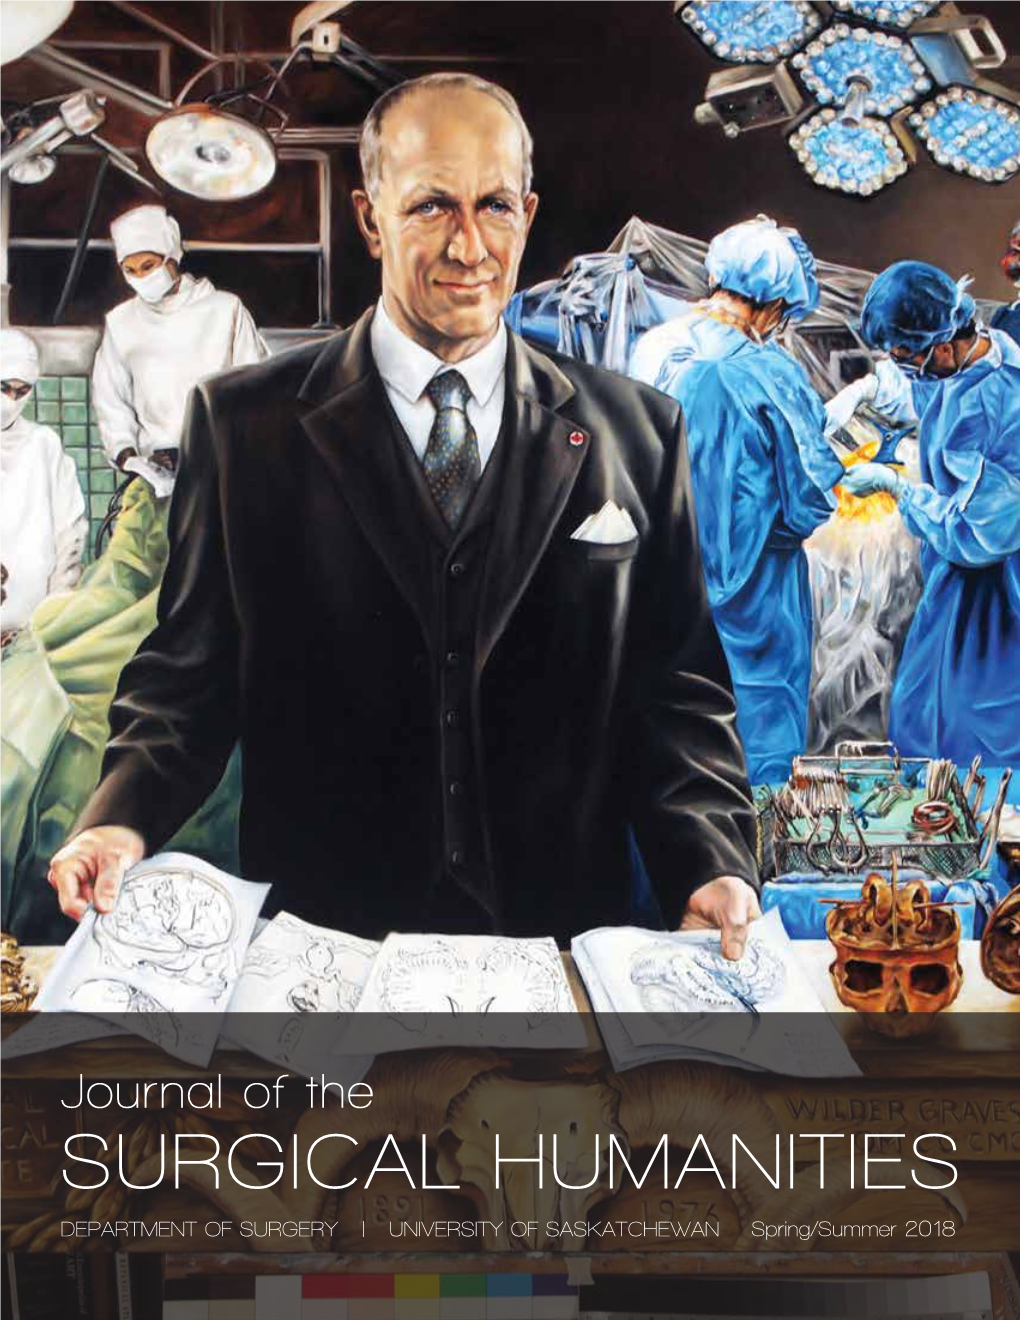 SURGICAL HUMANITIES DEPARTMENT of SURGERY | UNIVERSITY of SASKATCHEWAN Spring/Summer 2018 Journal of the SURGICAL HUMANITIES